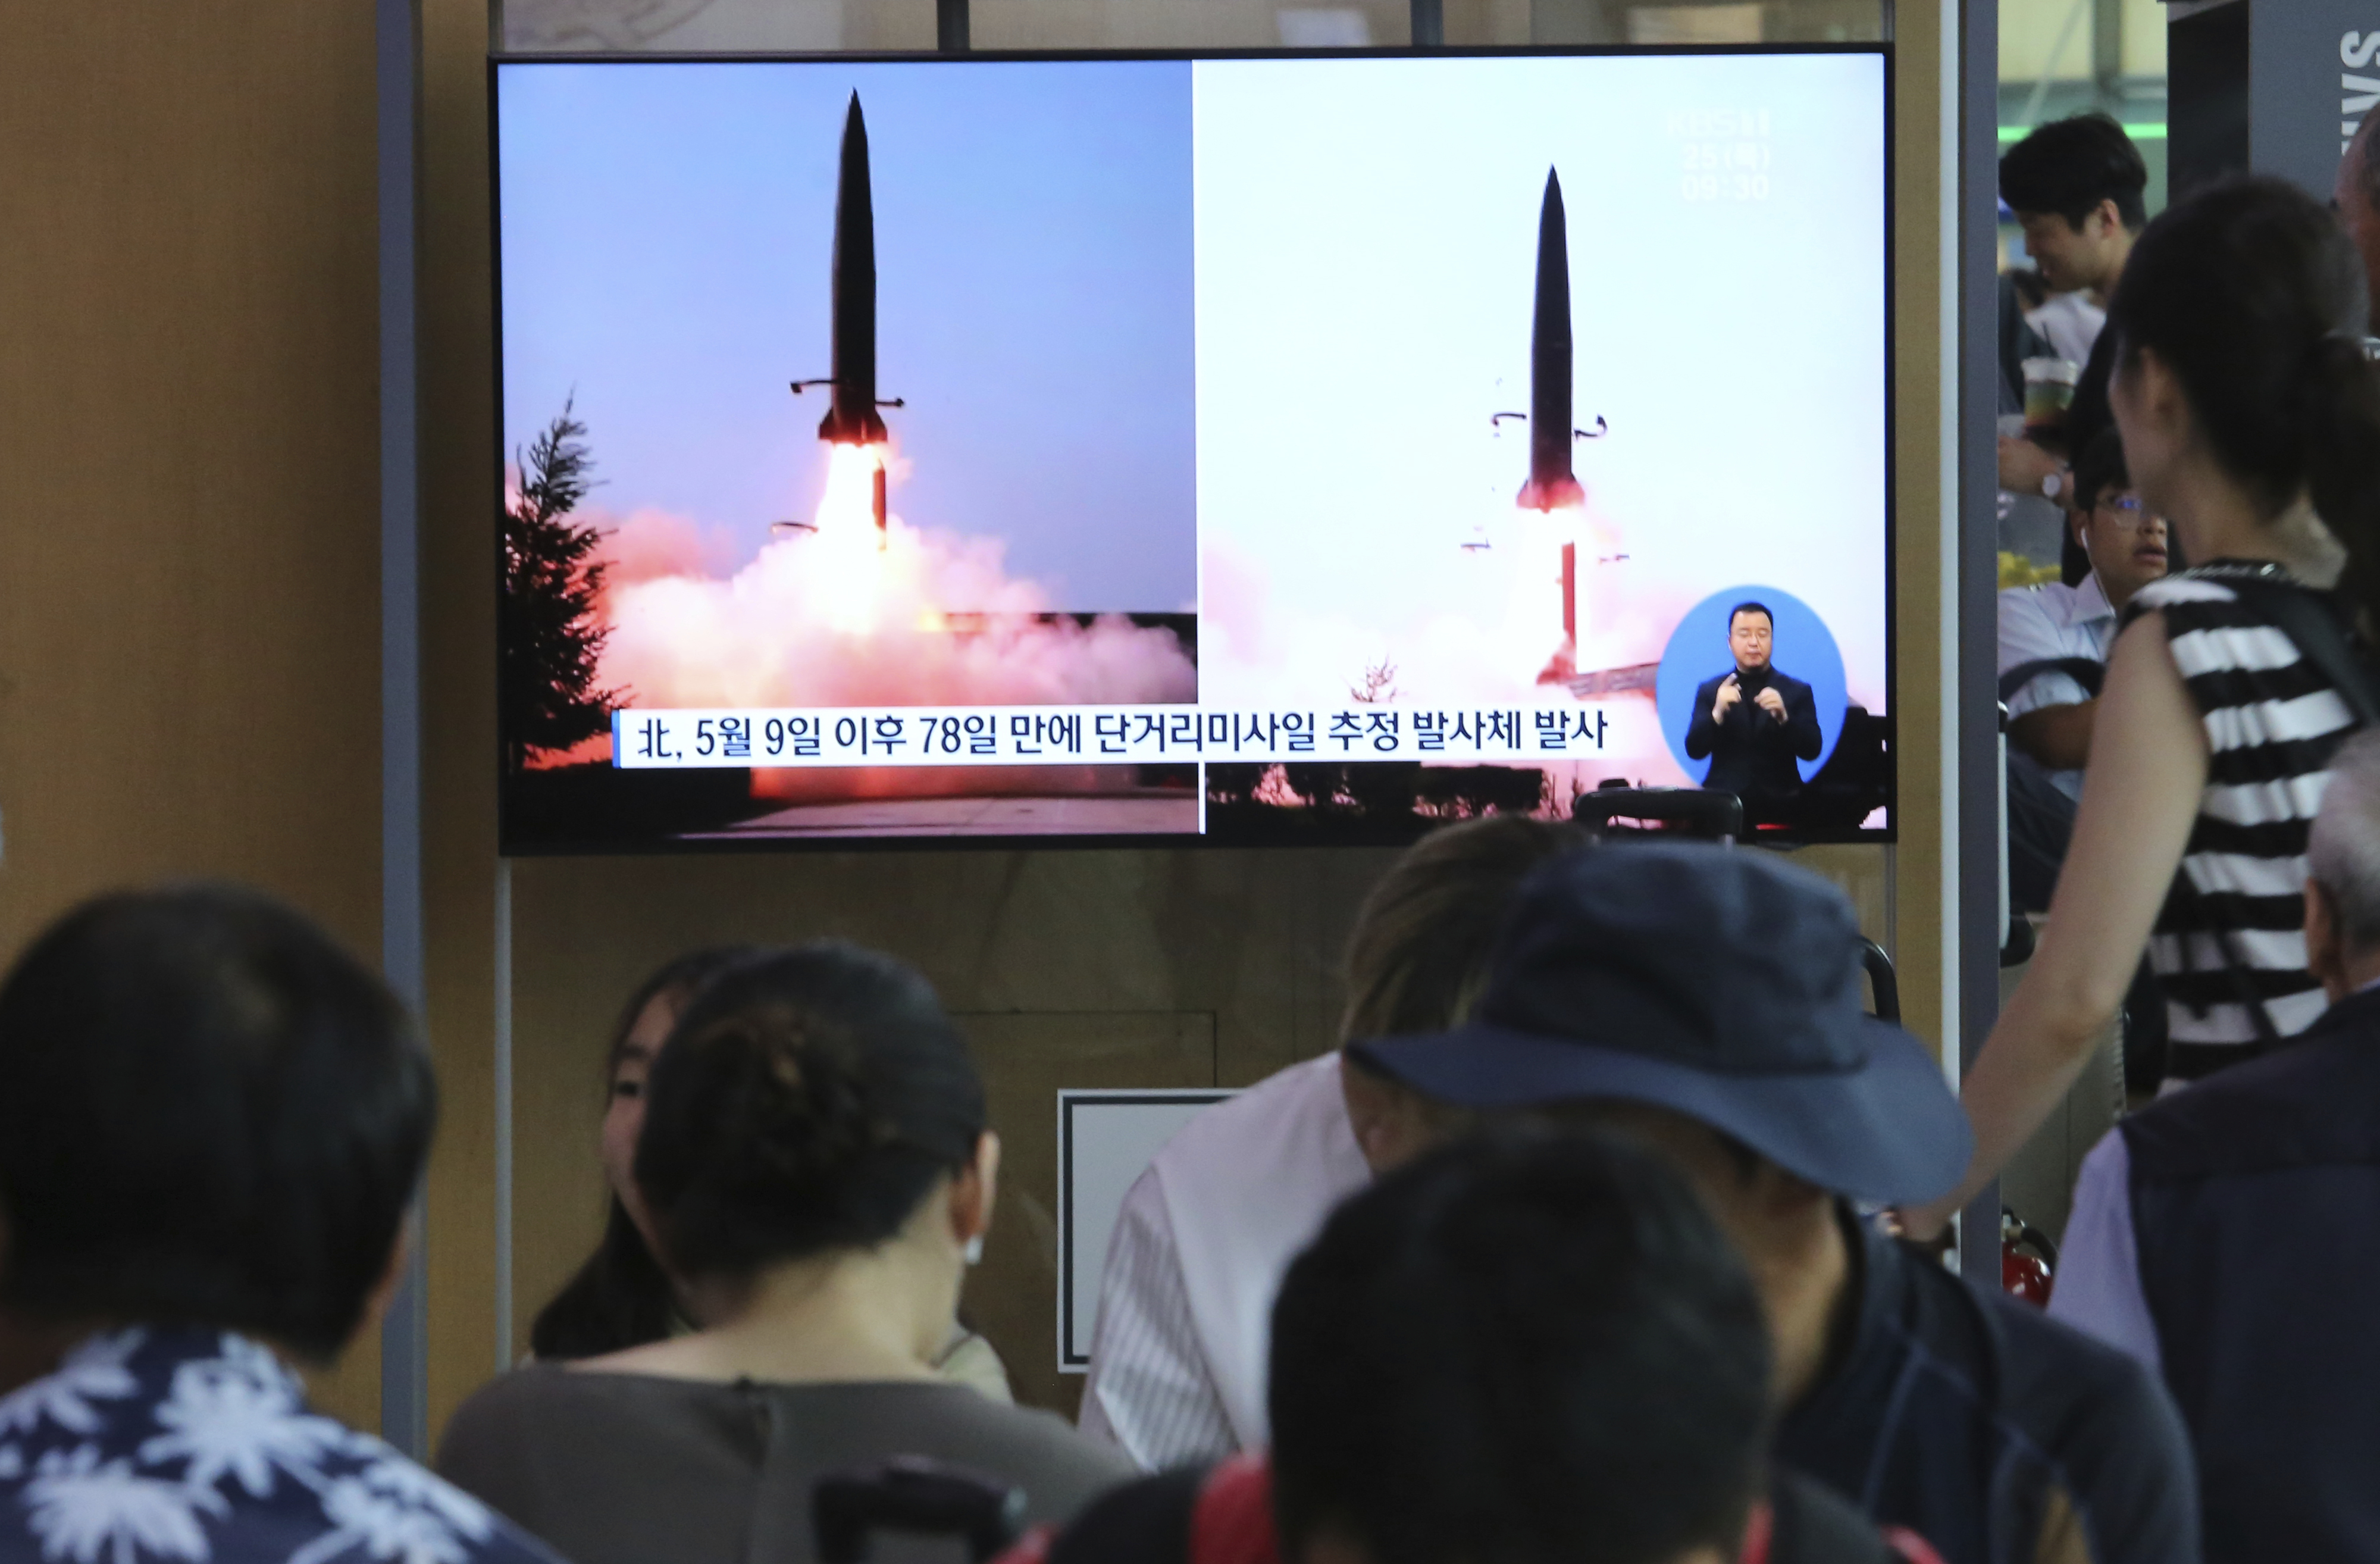 People watch a TV showing file images of North Korea's missile launch during a news program at the Seoul Railway Station in Seoul, South Korea, Thursday, July 25, 2019. North Korea fired two unidentified projectiles into the sea on Thursday, South Korea's military said, the first launches in more than two months as North Korean and U.S. officials struggle to restart nuclear diplomacy. The signs read: 